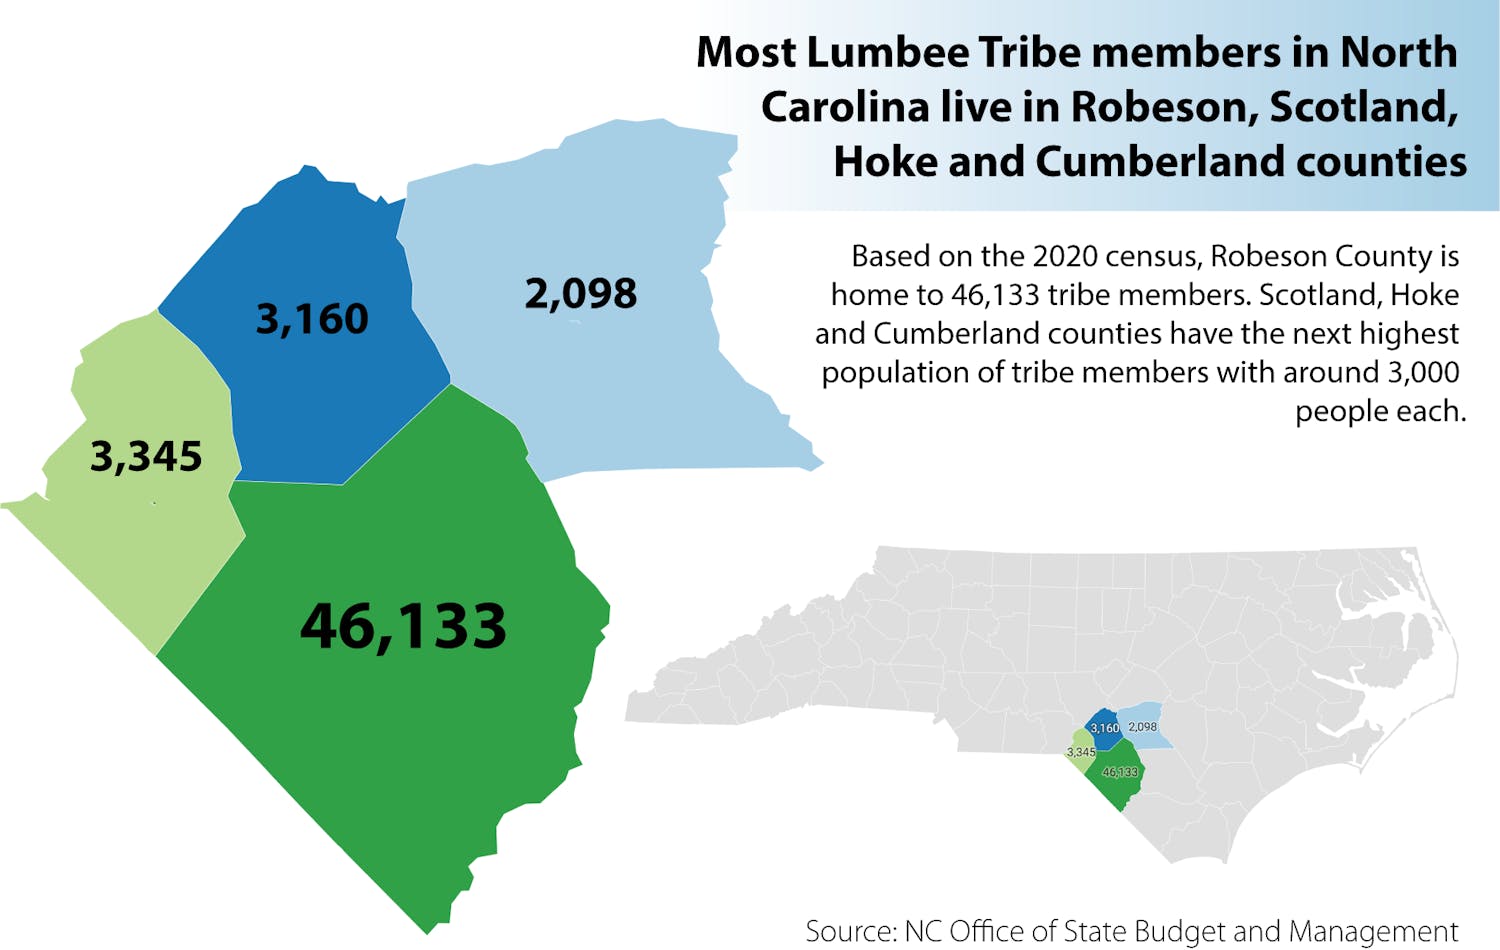 Most Lumbee Tribe members in North Carolina live in Robeson, Scotland, Hoke and Cumberland counties